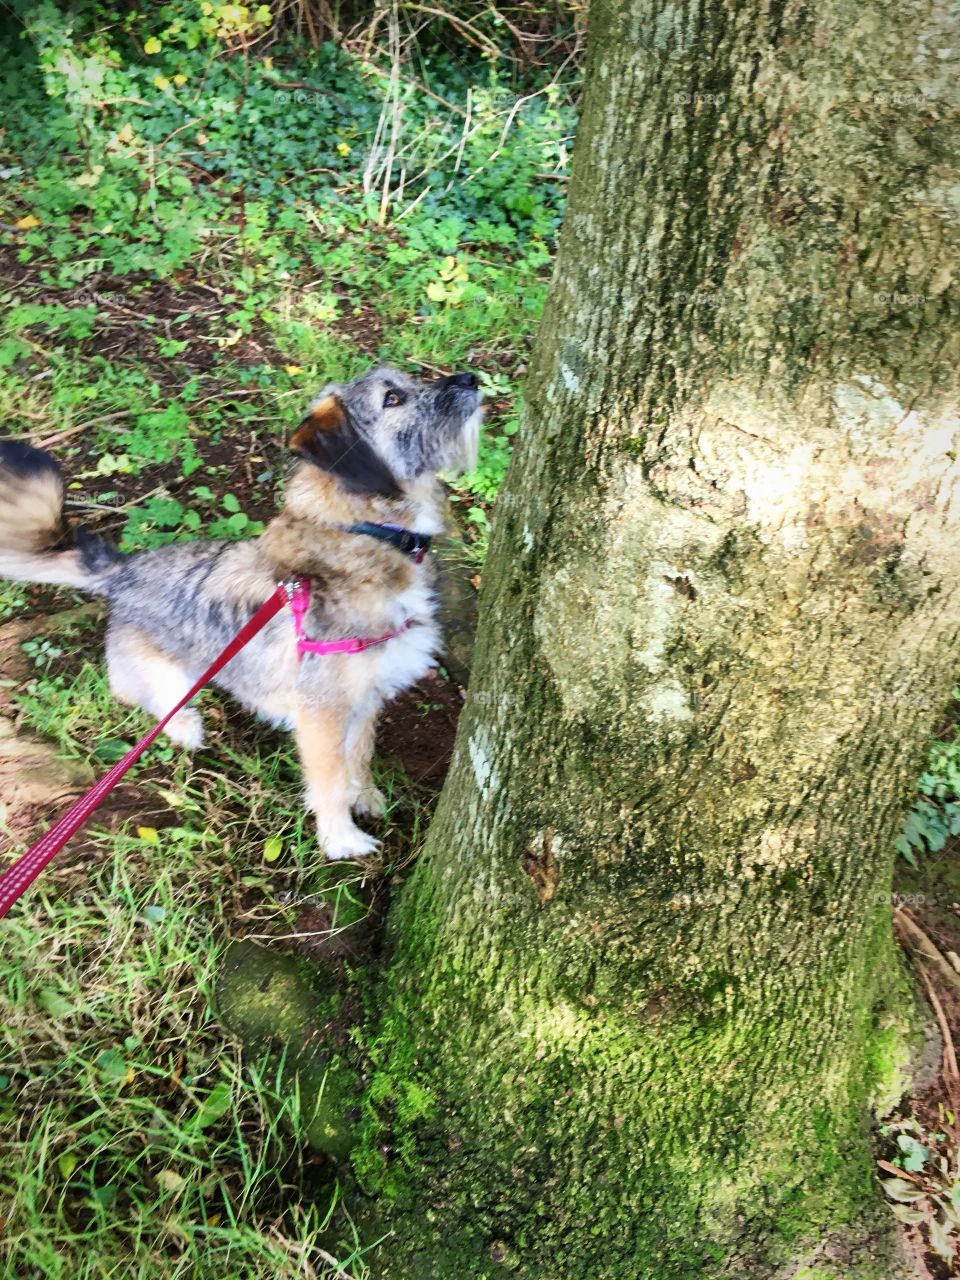 The adventures of Missy the Romanian Rescue Dog